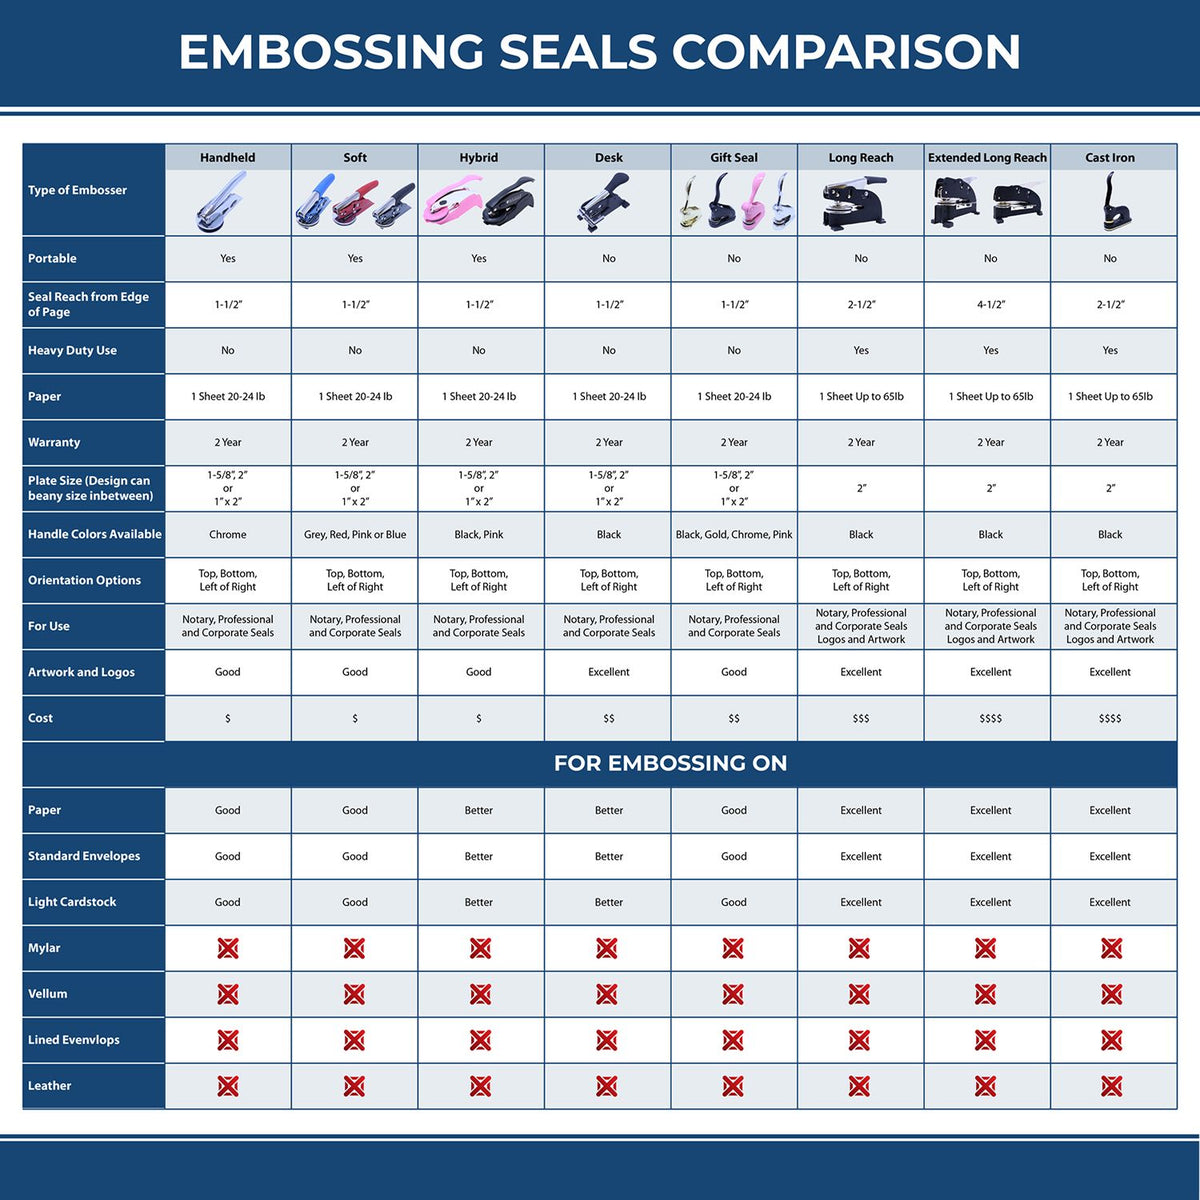 A comparison chart for the different types of mount models available for the State of Alabama Long Reach Architectural Embossing Seal.